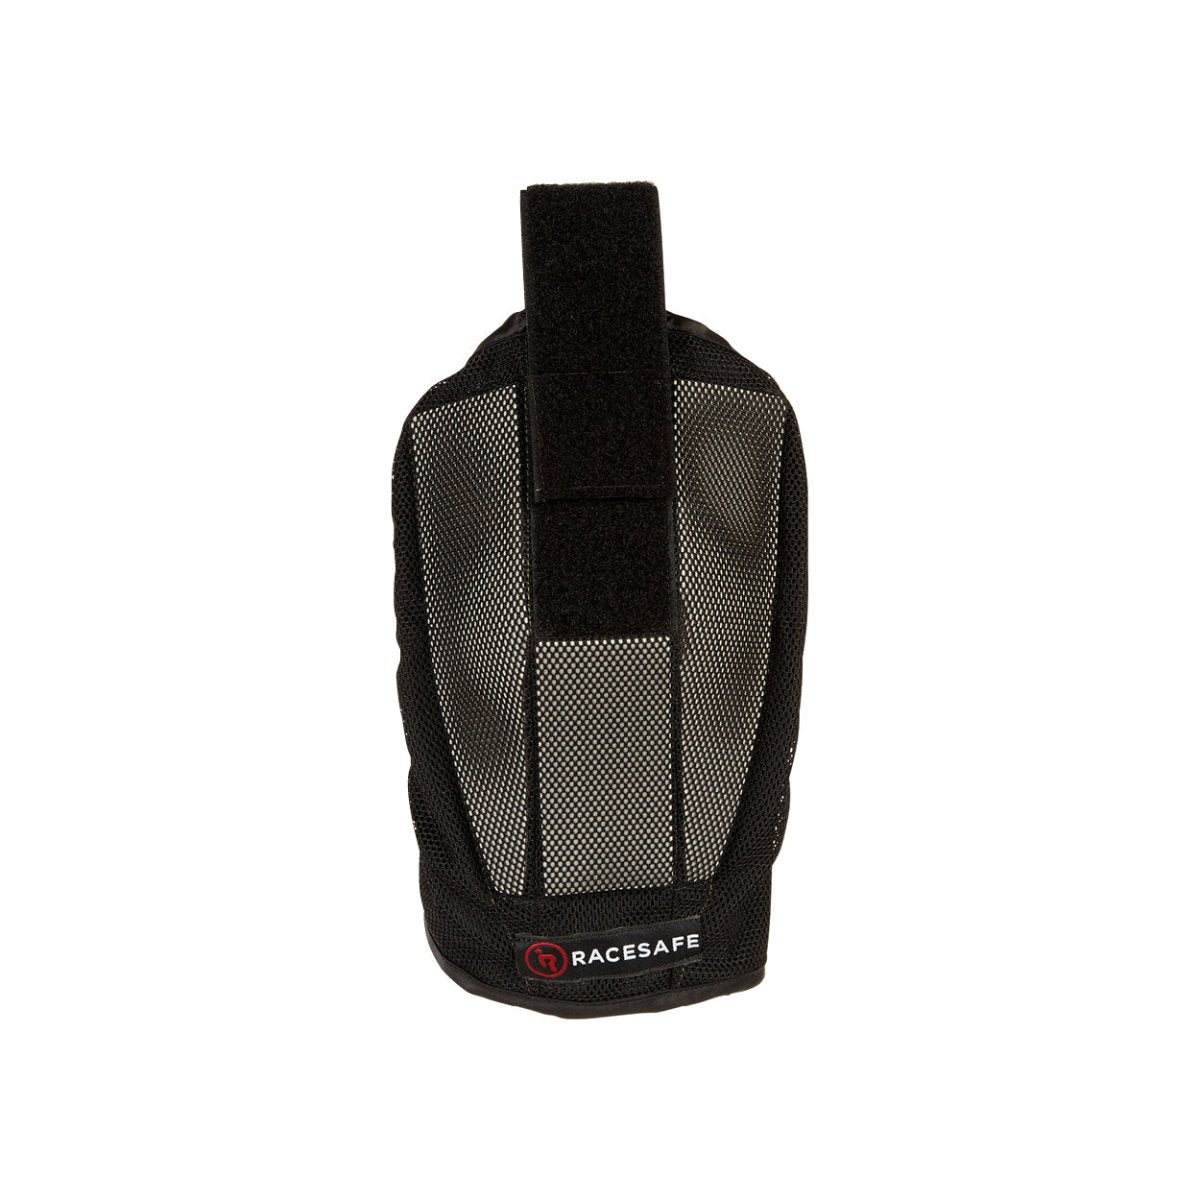 Racesafe Provent 3.0 Shoulder Pads - Small -